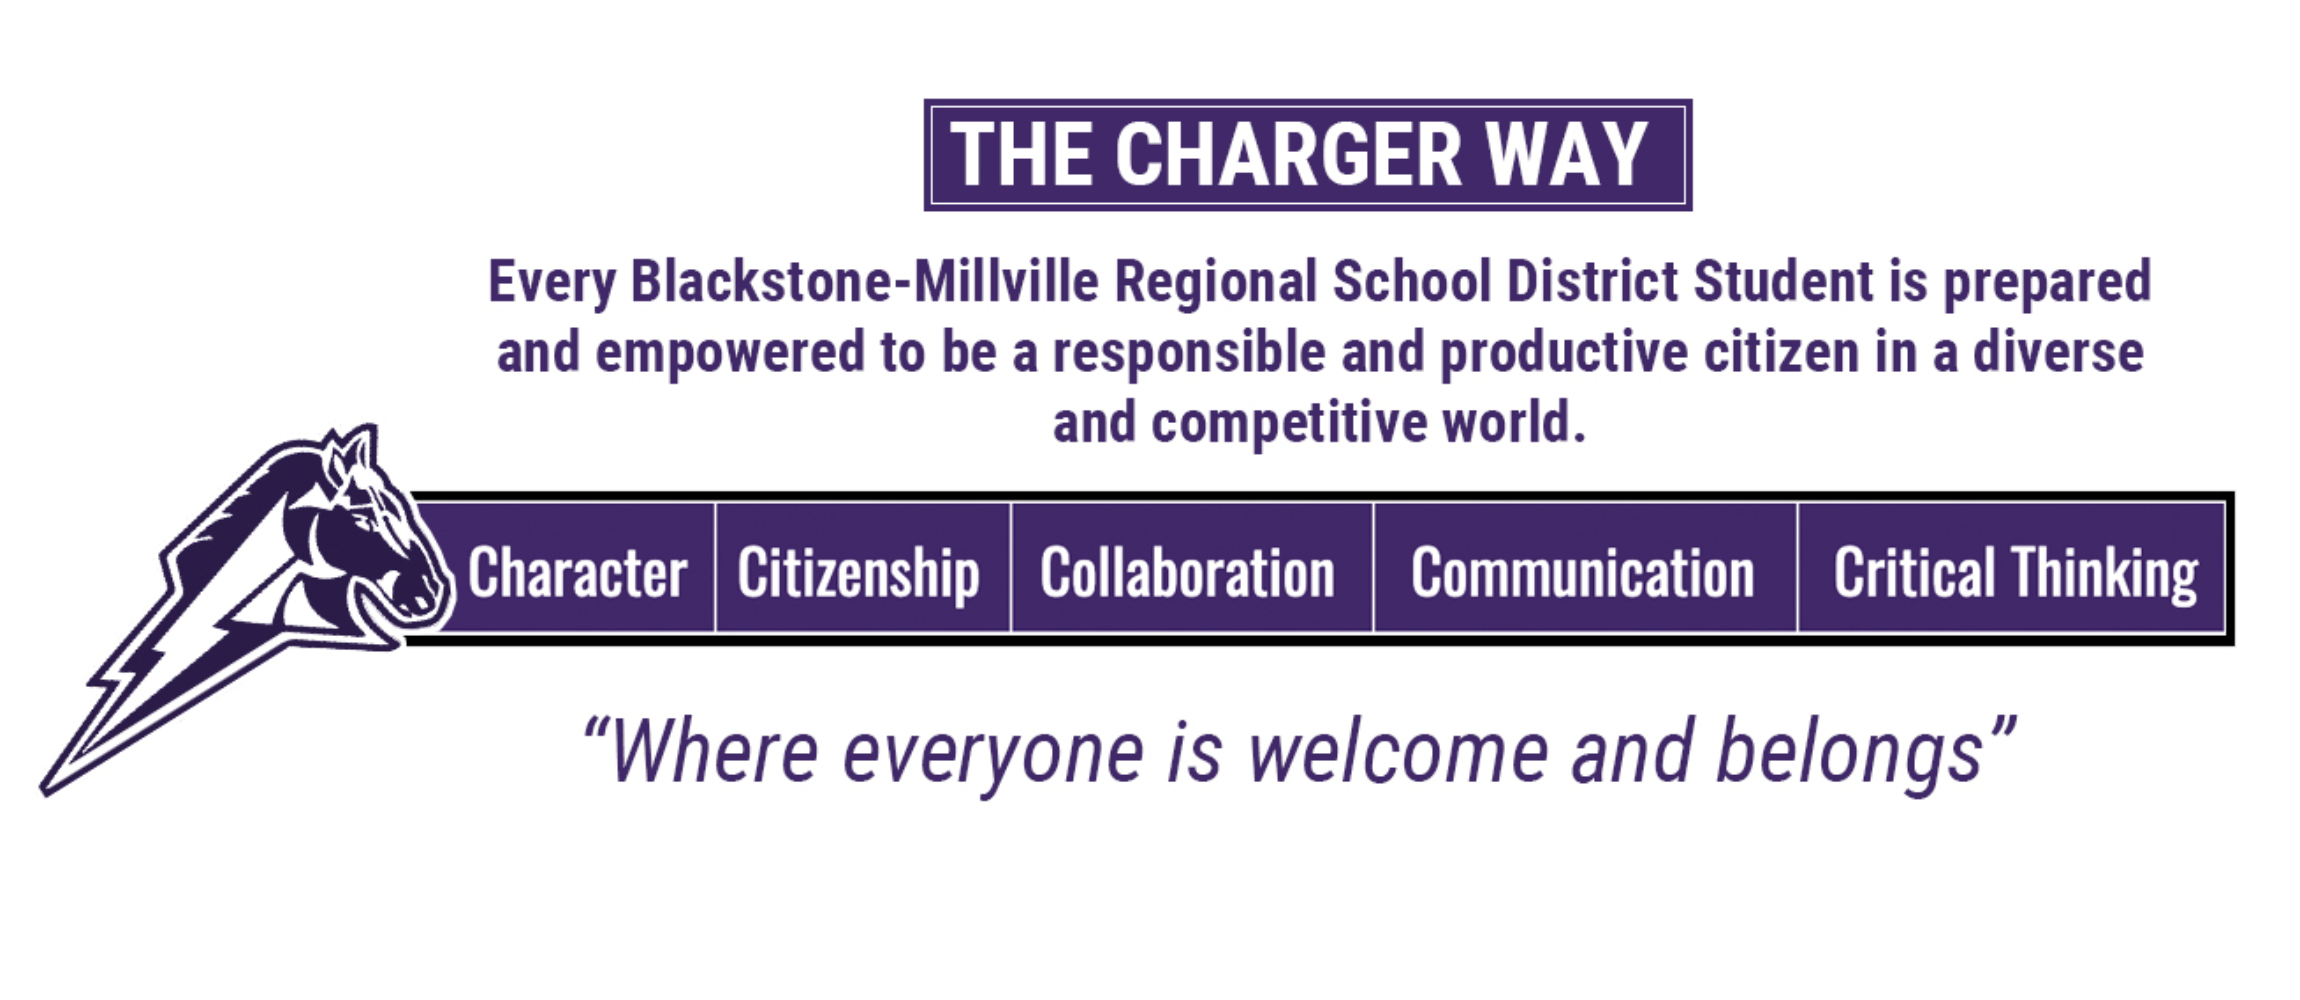 THE CHARGER WAY Every Blackstone-Millville Regional School District Student is prepared and empowered to be a responsible and productive citizen in a diverse and competitive world. Character Citizenship Collaboration Communication Critical Thinking